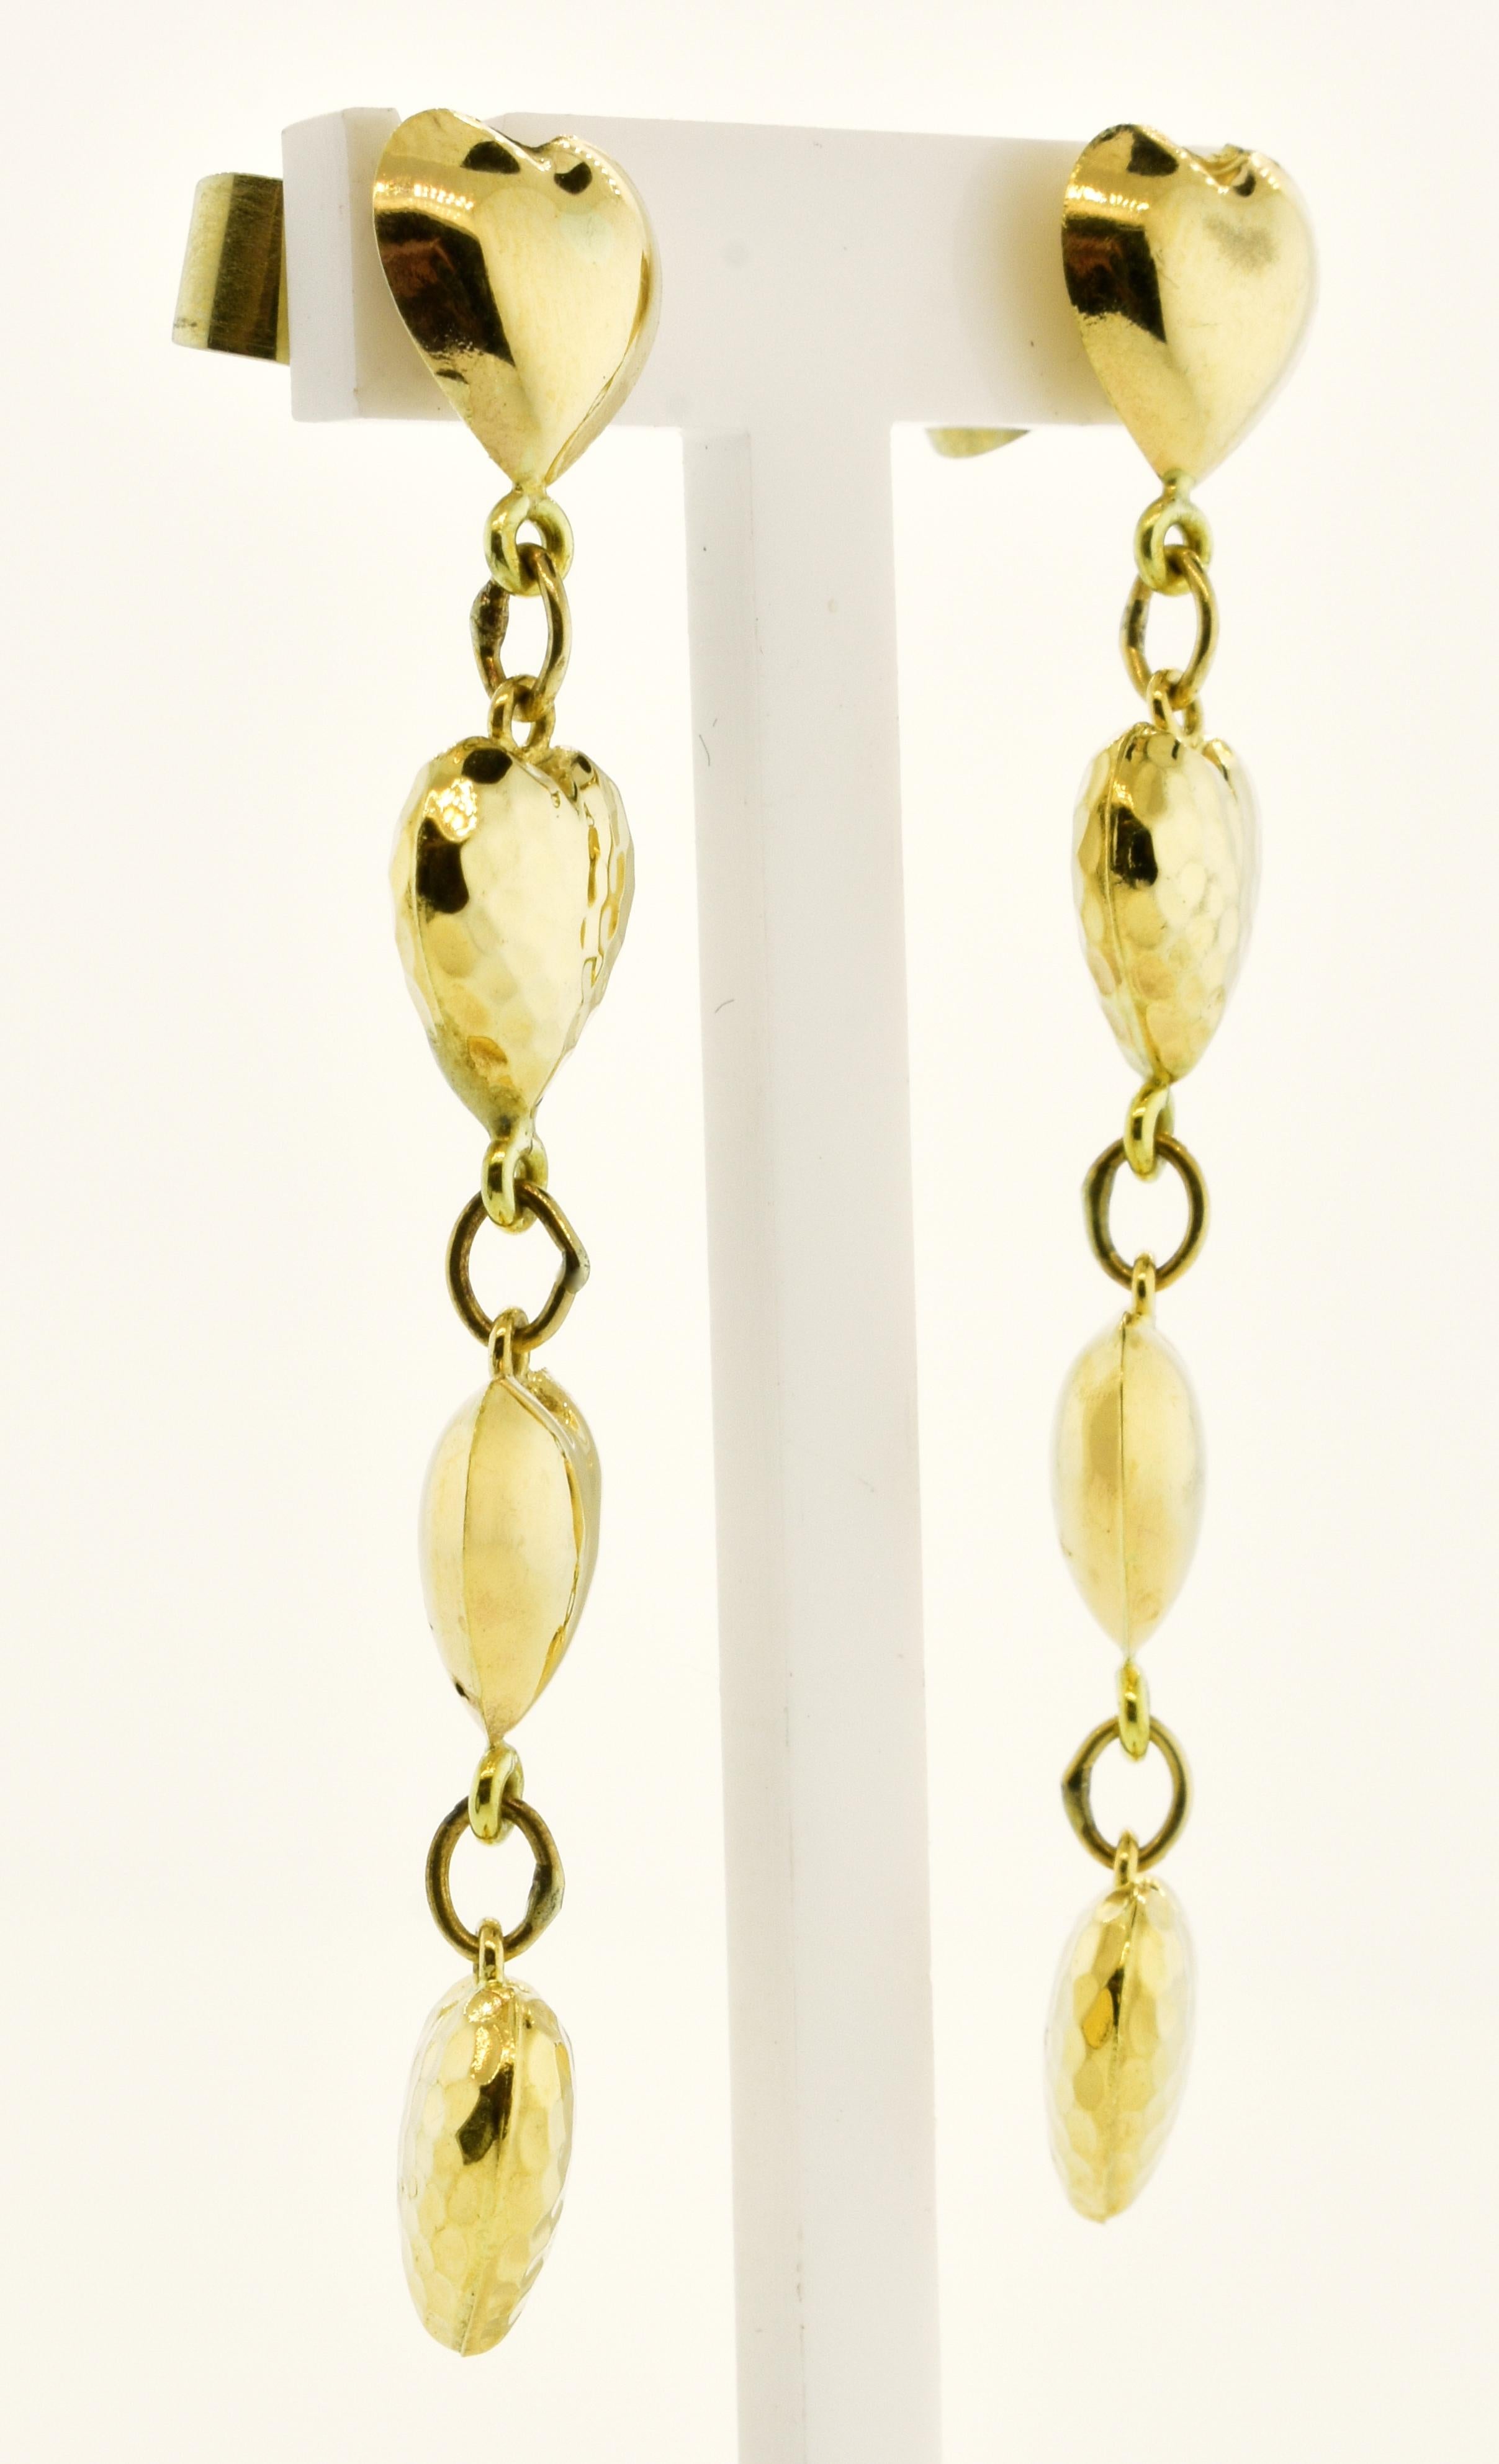 Gold dangling earrings in heart motifs, these earrings  are comprised of smooth and faceted gold hearts.  They are in fine condition and easy to wear.  They weigh 4.44 grams and so are easy to wear but have a nice strong gold look.  If you love to